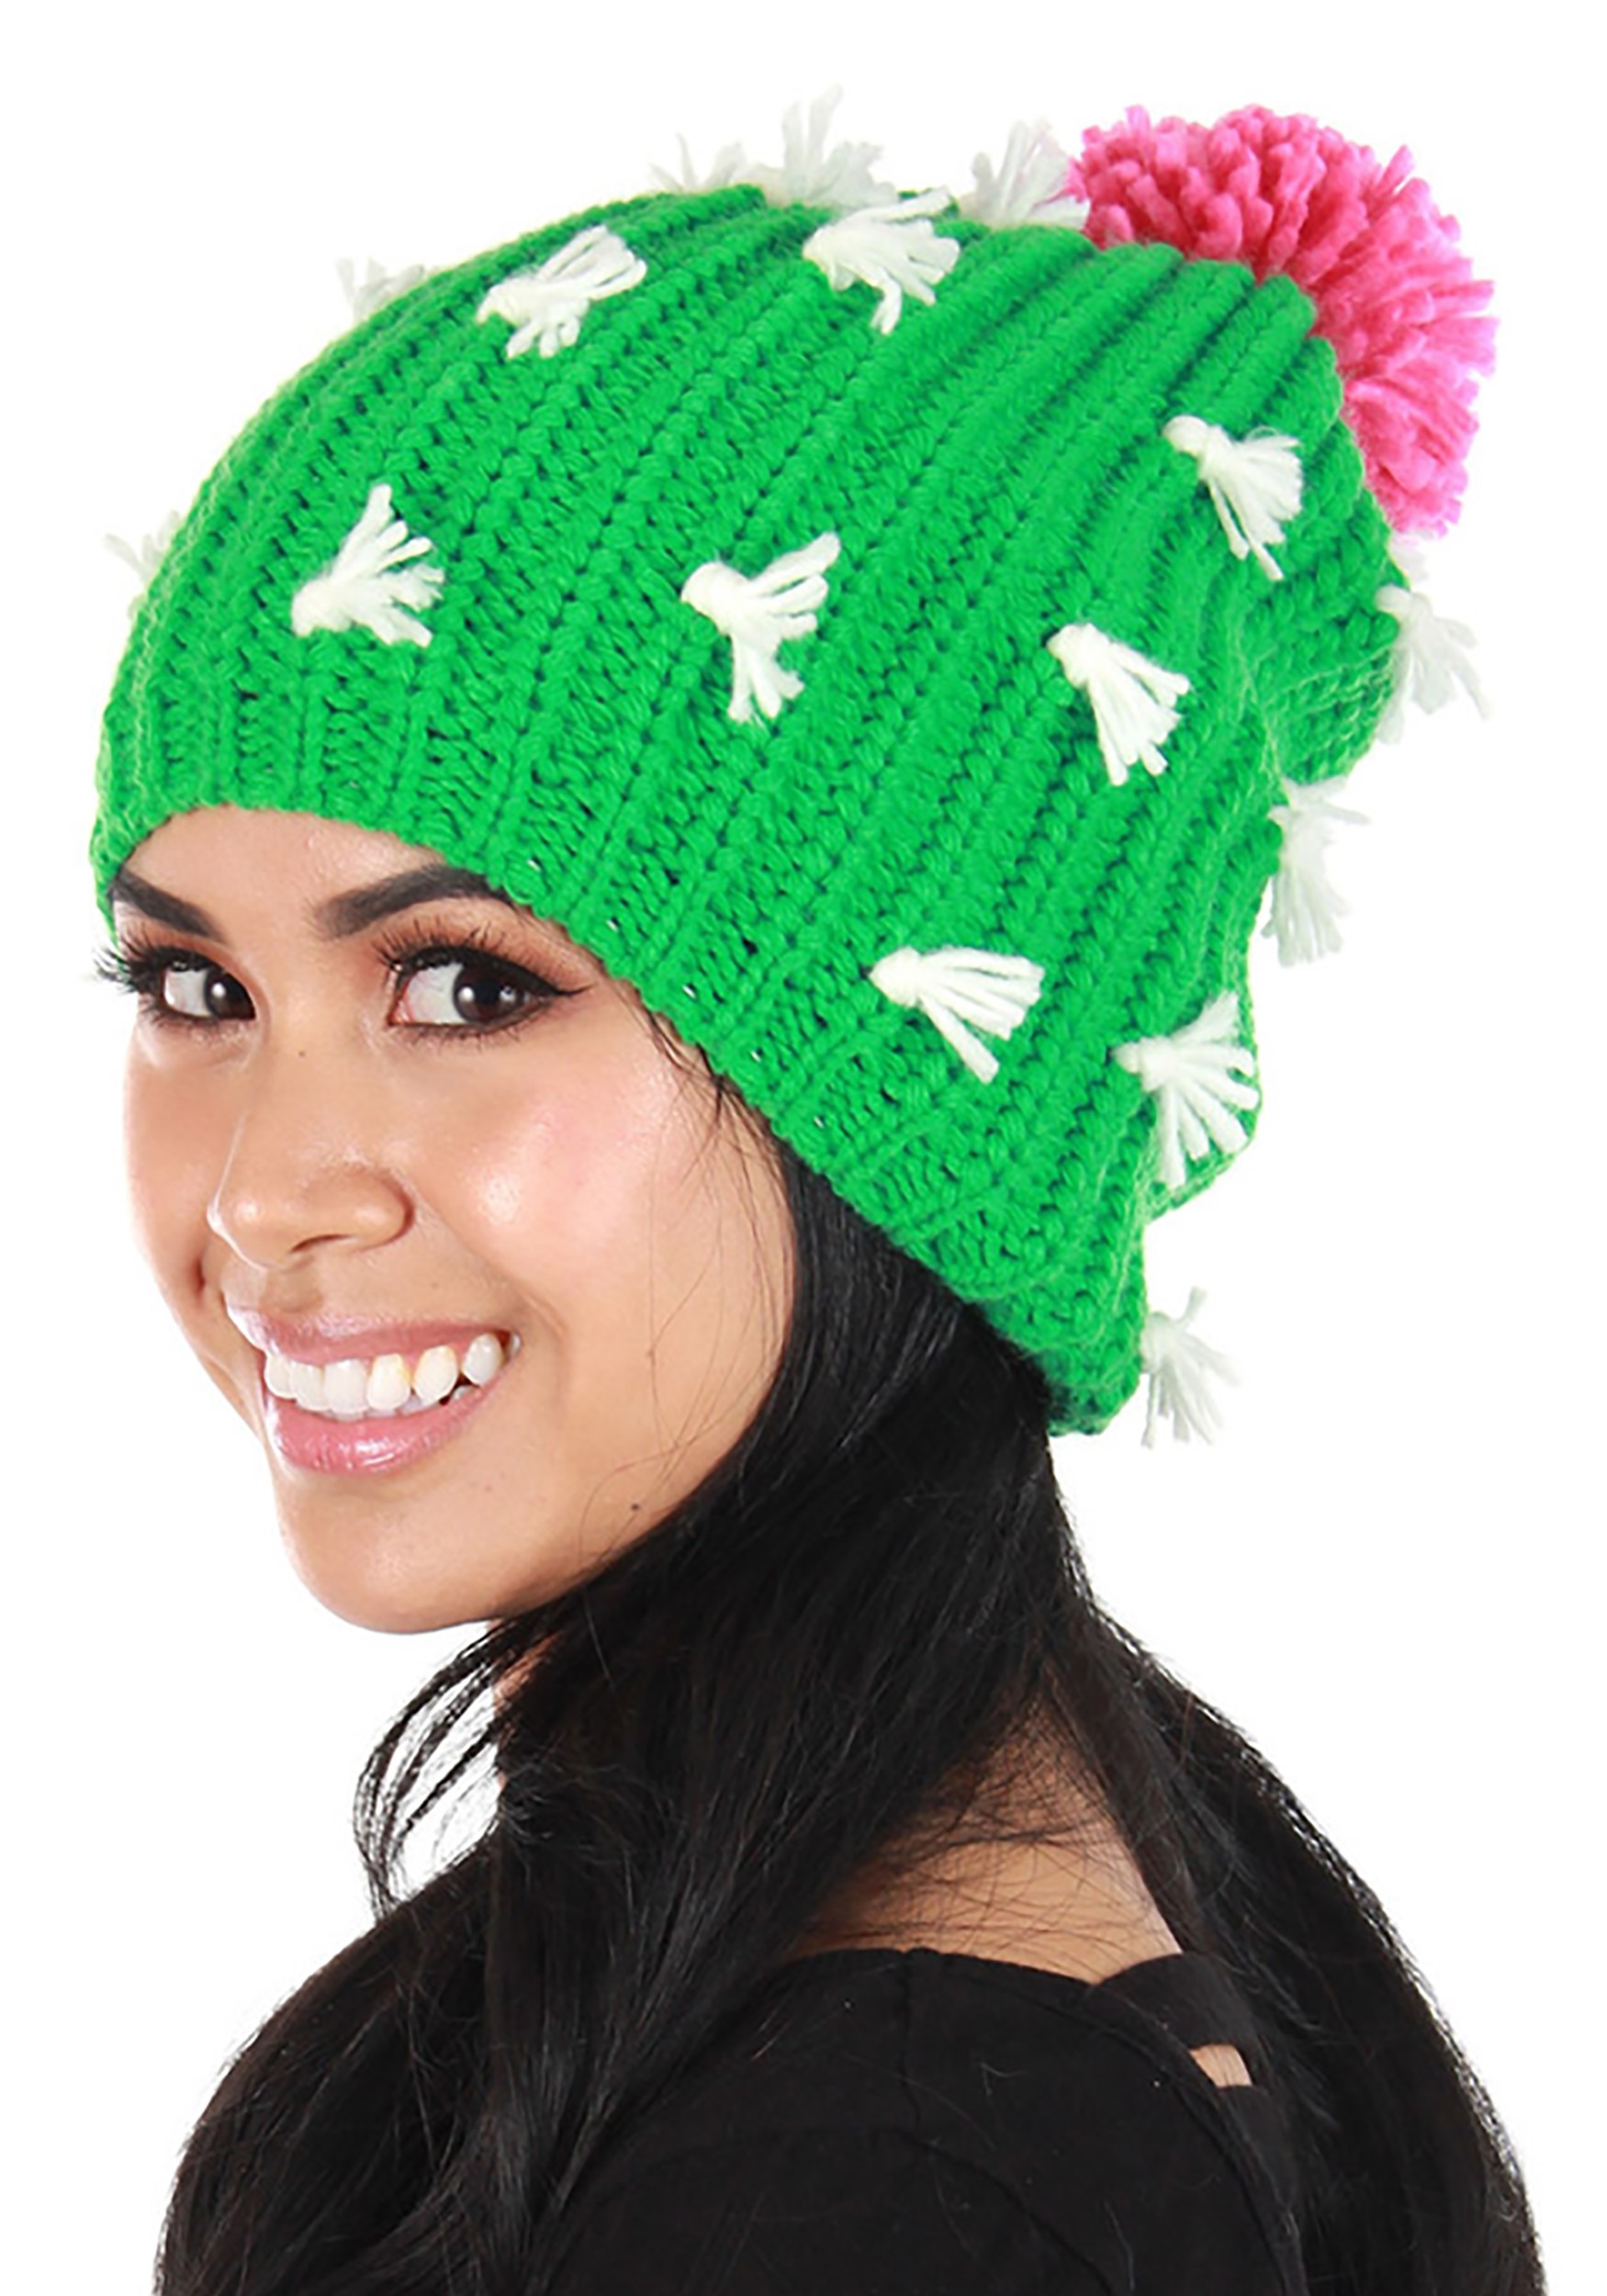 Adult Knit Cactus Slouch Beanie | Adult Beanie